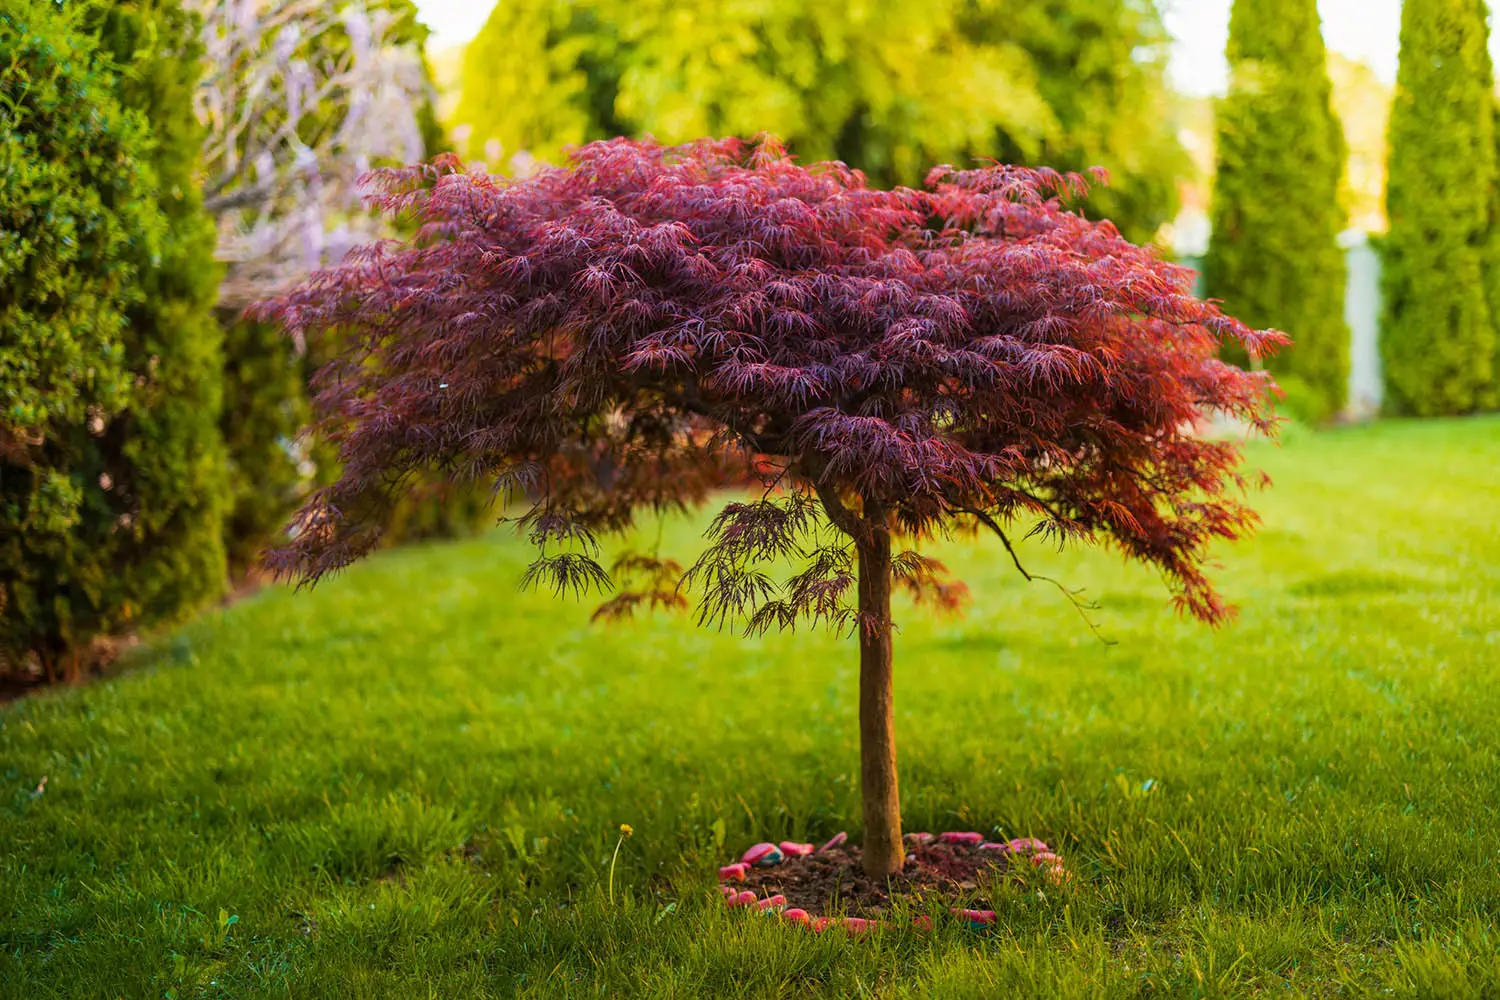 Is it possible to manipulate the height of a maple tree